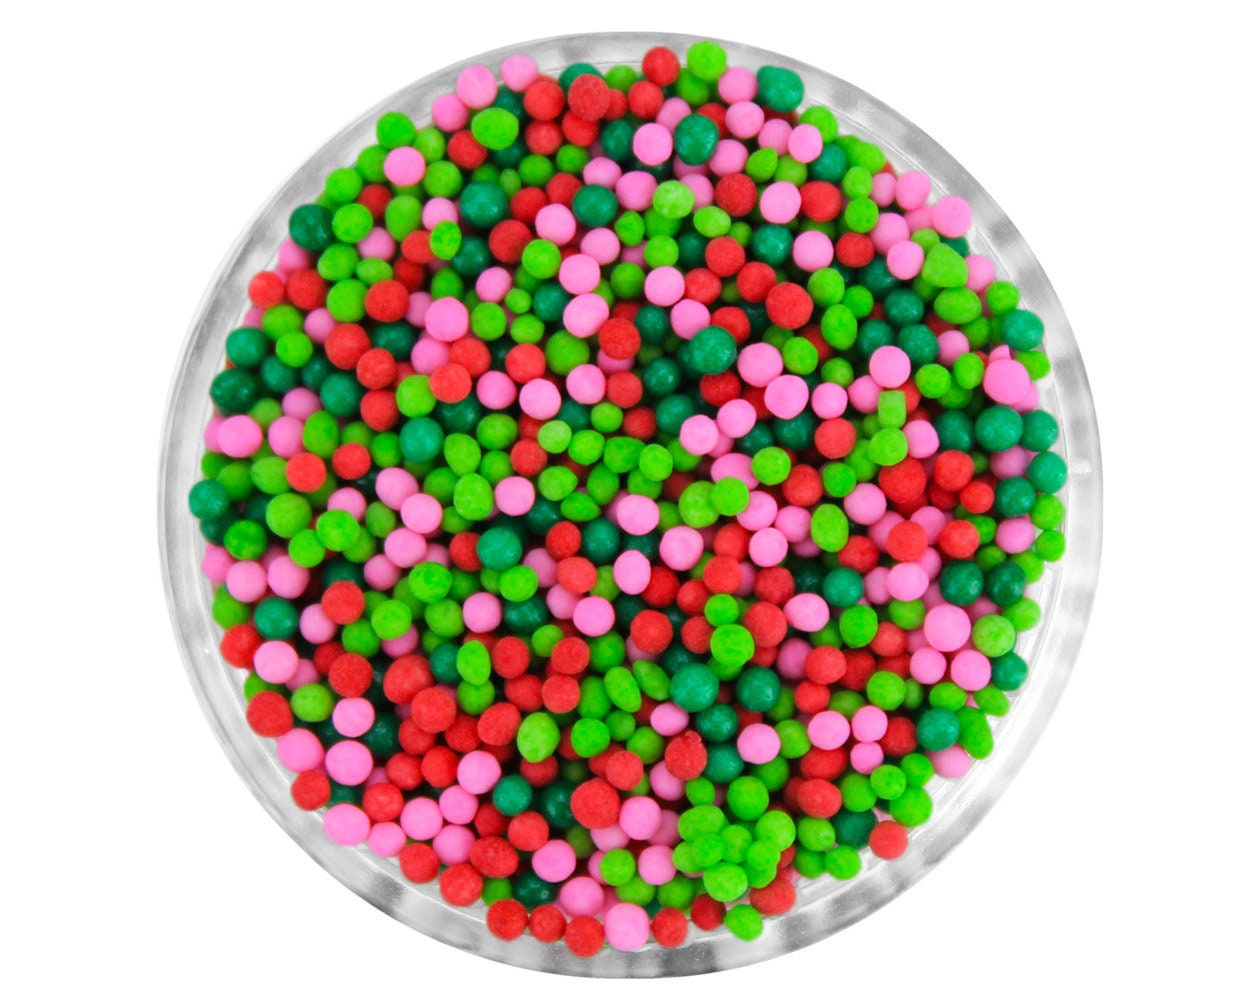 Merry & Bright Non-Pareils Blend - Our Merry & Bright Blend Is A Mix Of Non-Pareils in Cherry Red, Princess Pink, Green, Lime Green